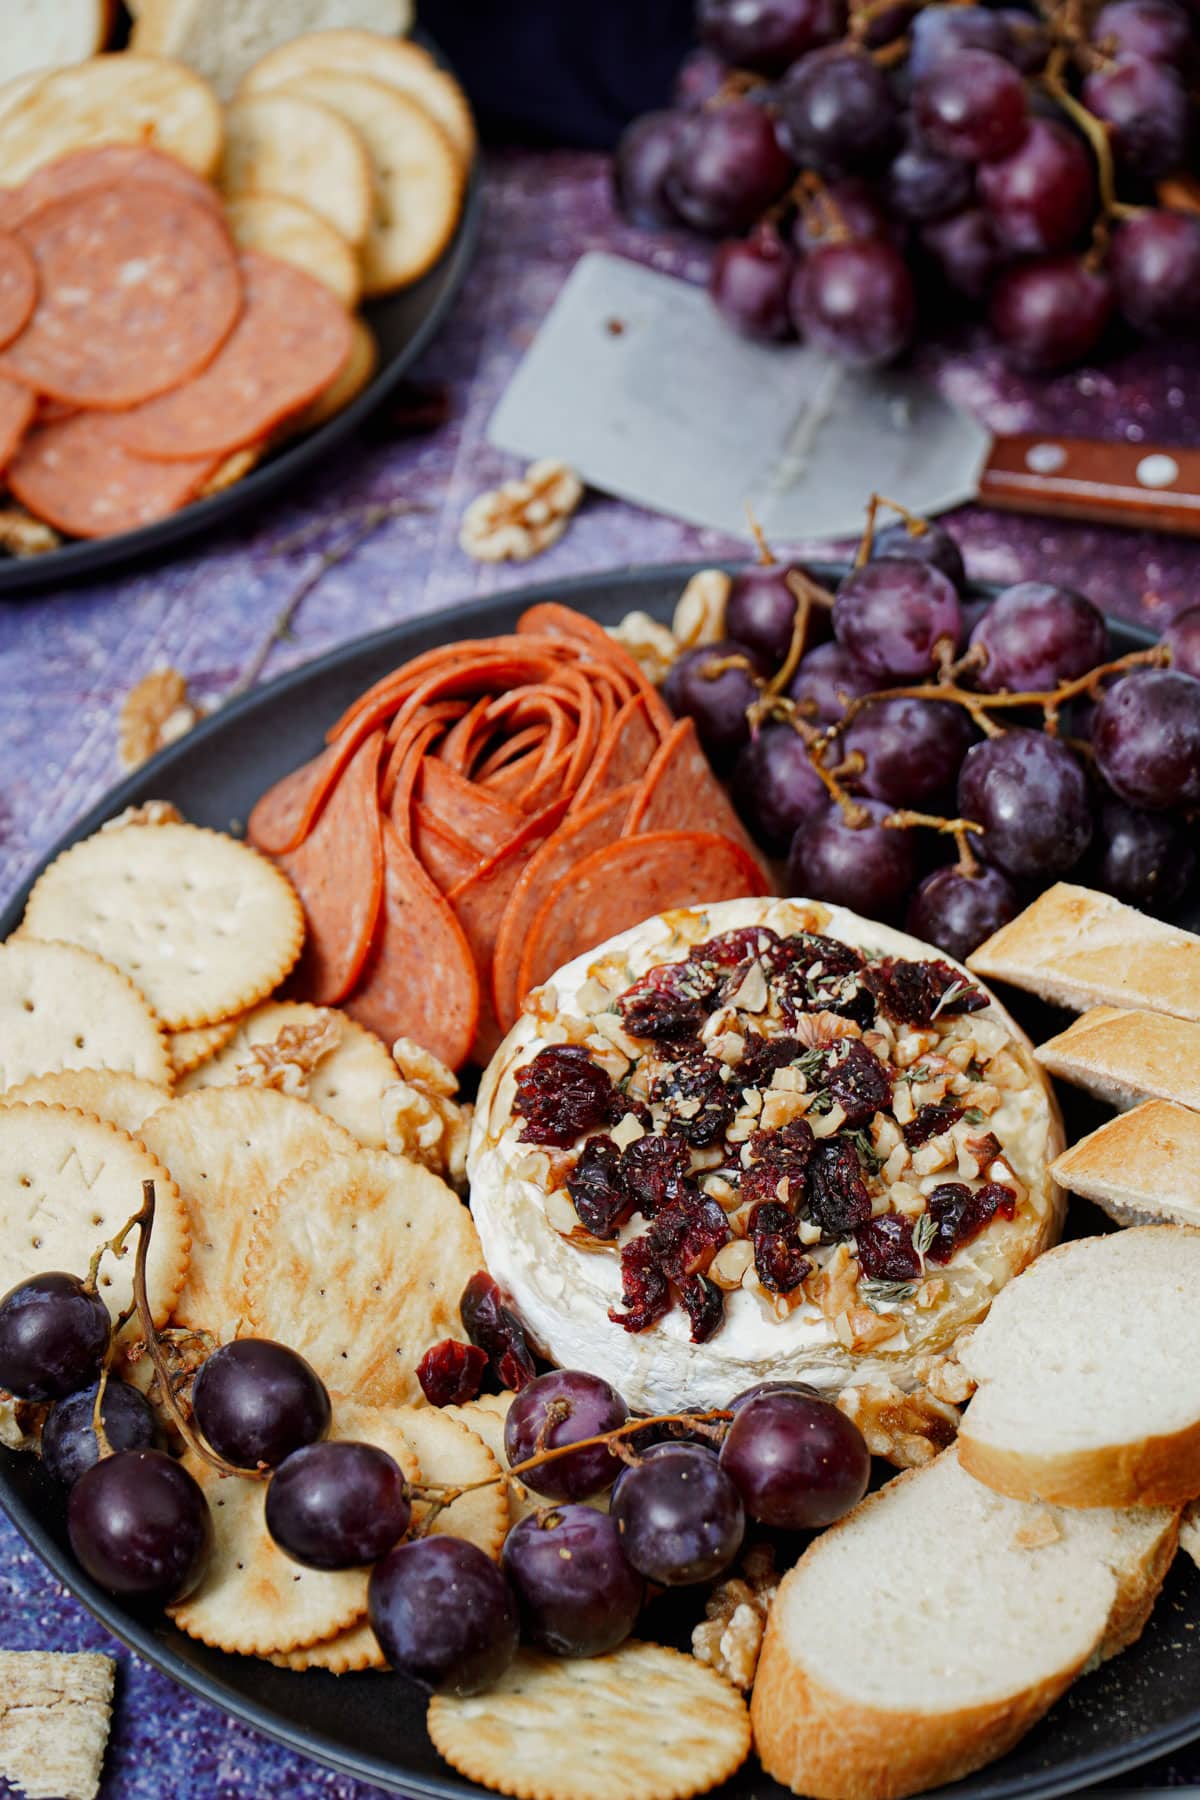 Air Fryer Baked Brie recipe bite shot, with baguette slices, grapes, crackers, and pepperoni.